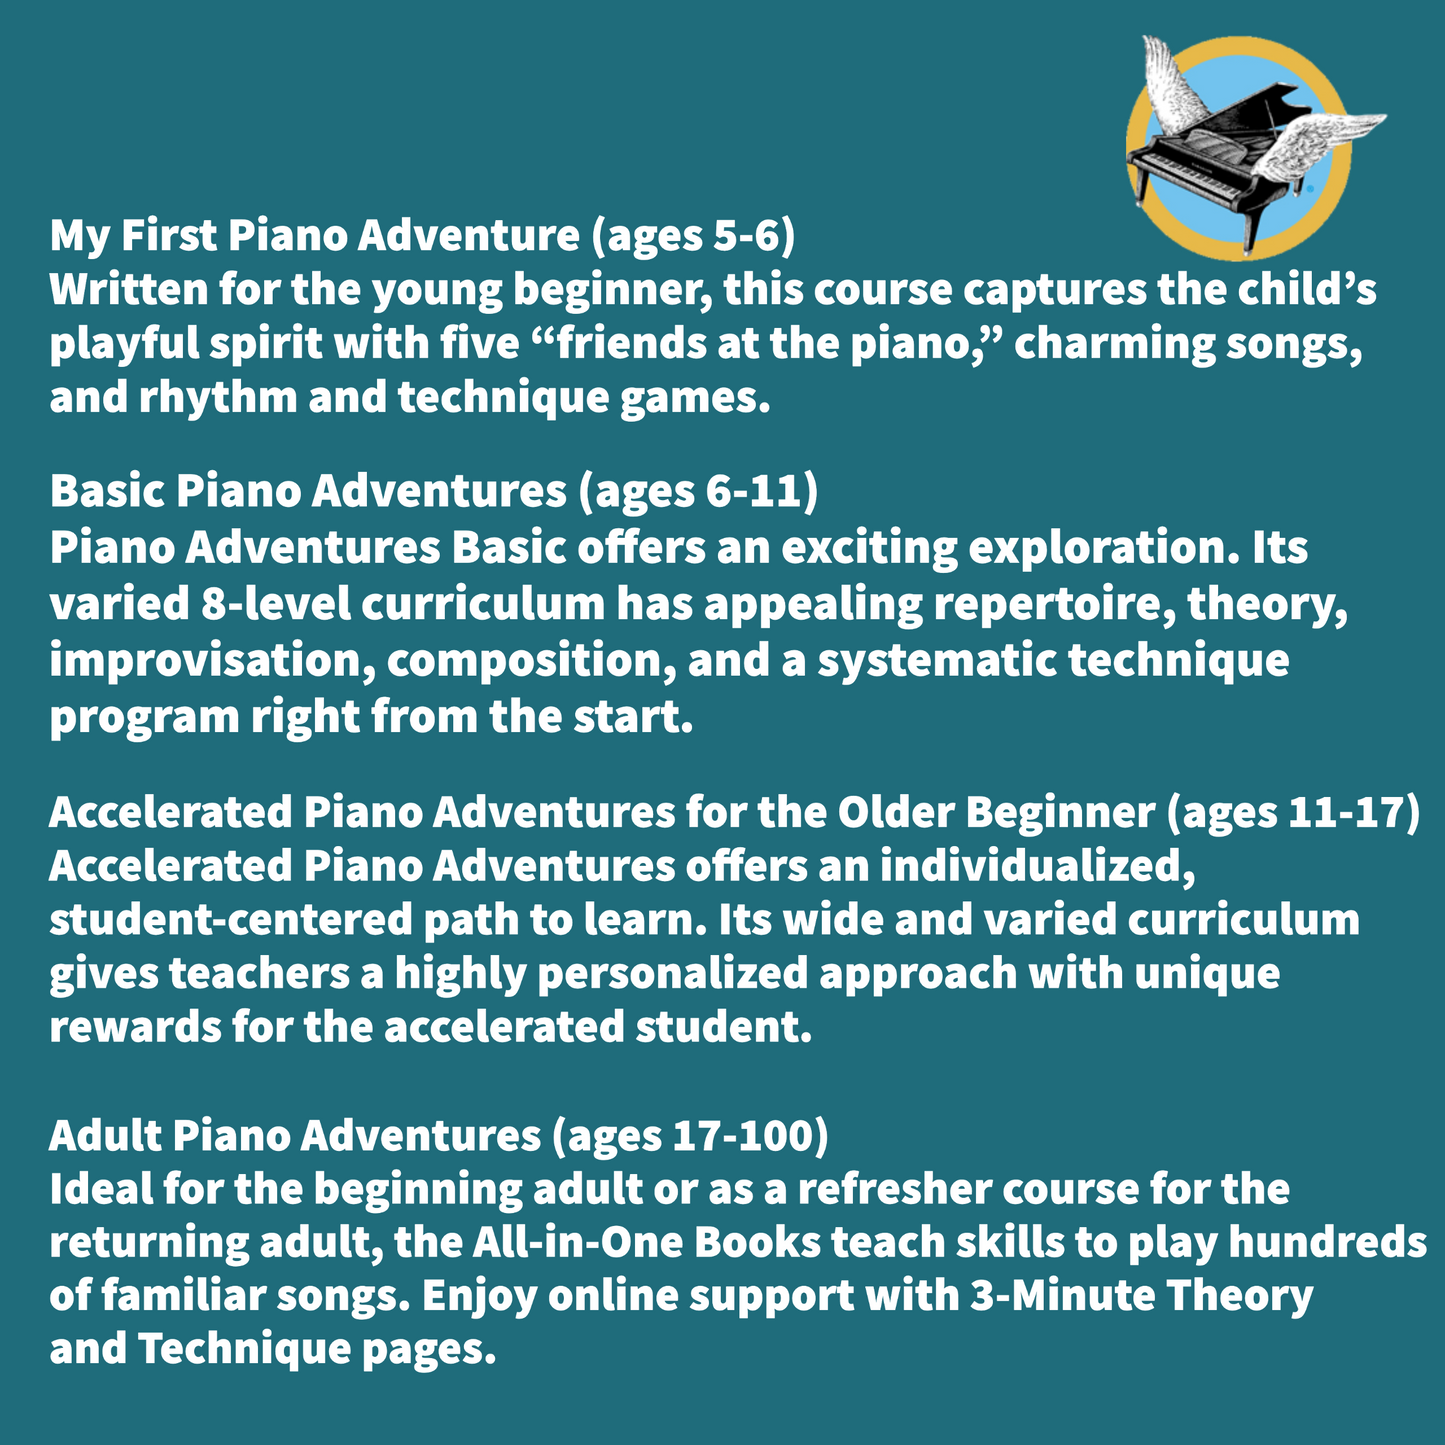 Piano Adventures: All In Two - Primer & Lesson Theory Book Keyboard